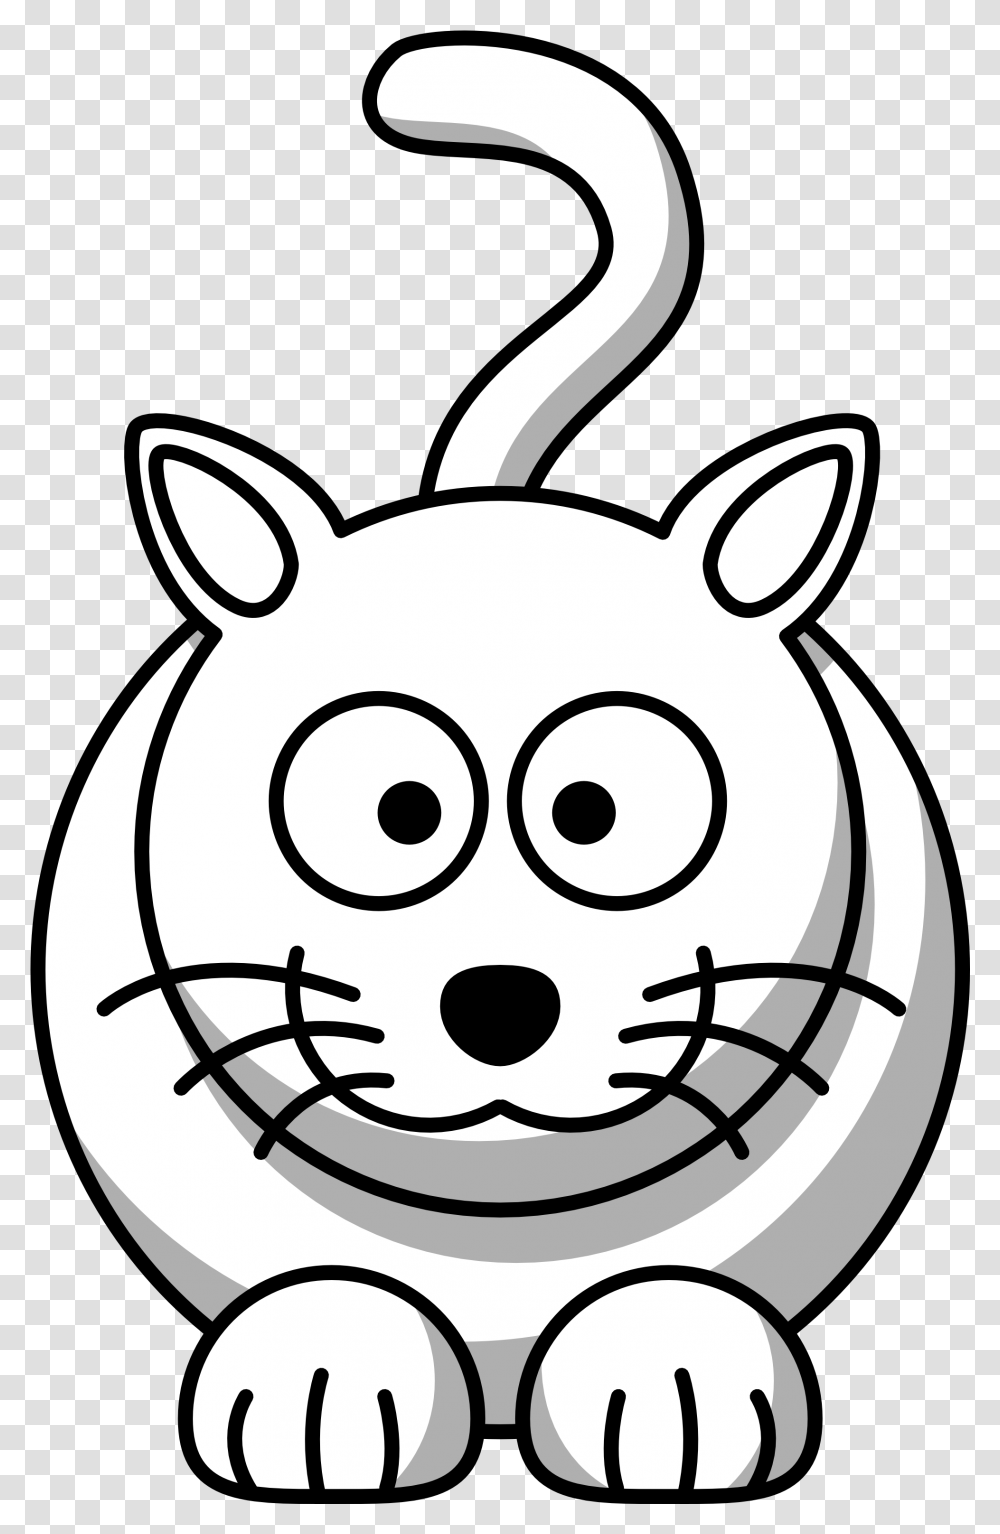 Farm Animals Black And White Black And White Cartoon Pictures Of Animals, Stencil, Symbol, Piggy Bank Transparent Png